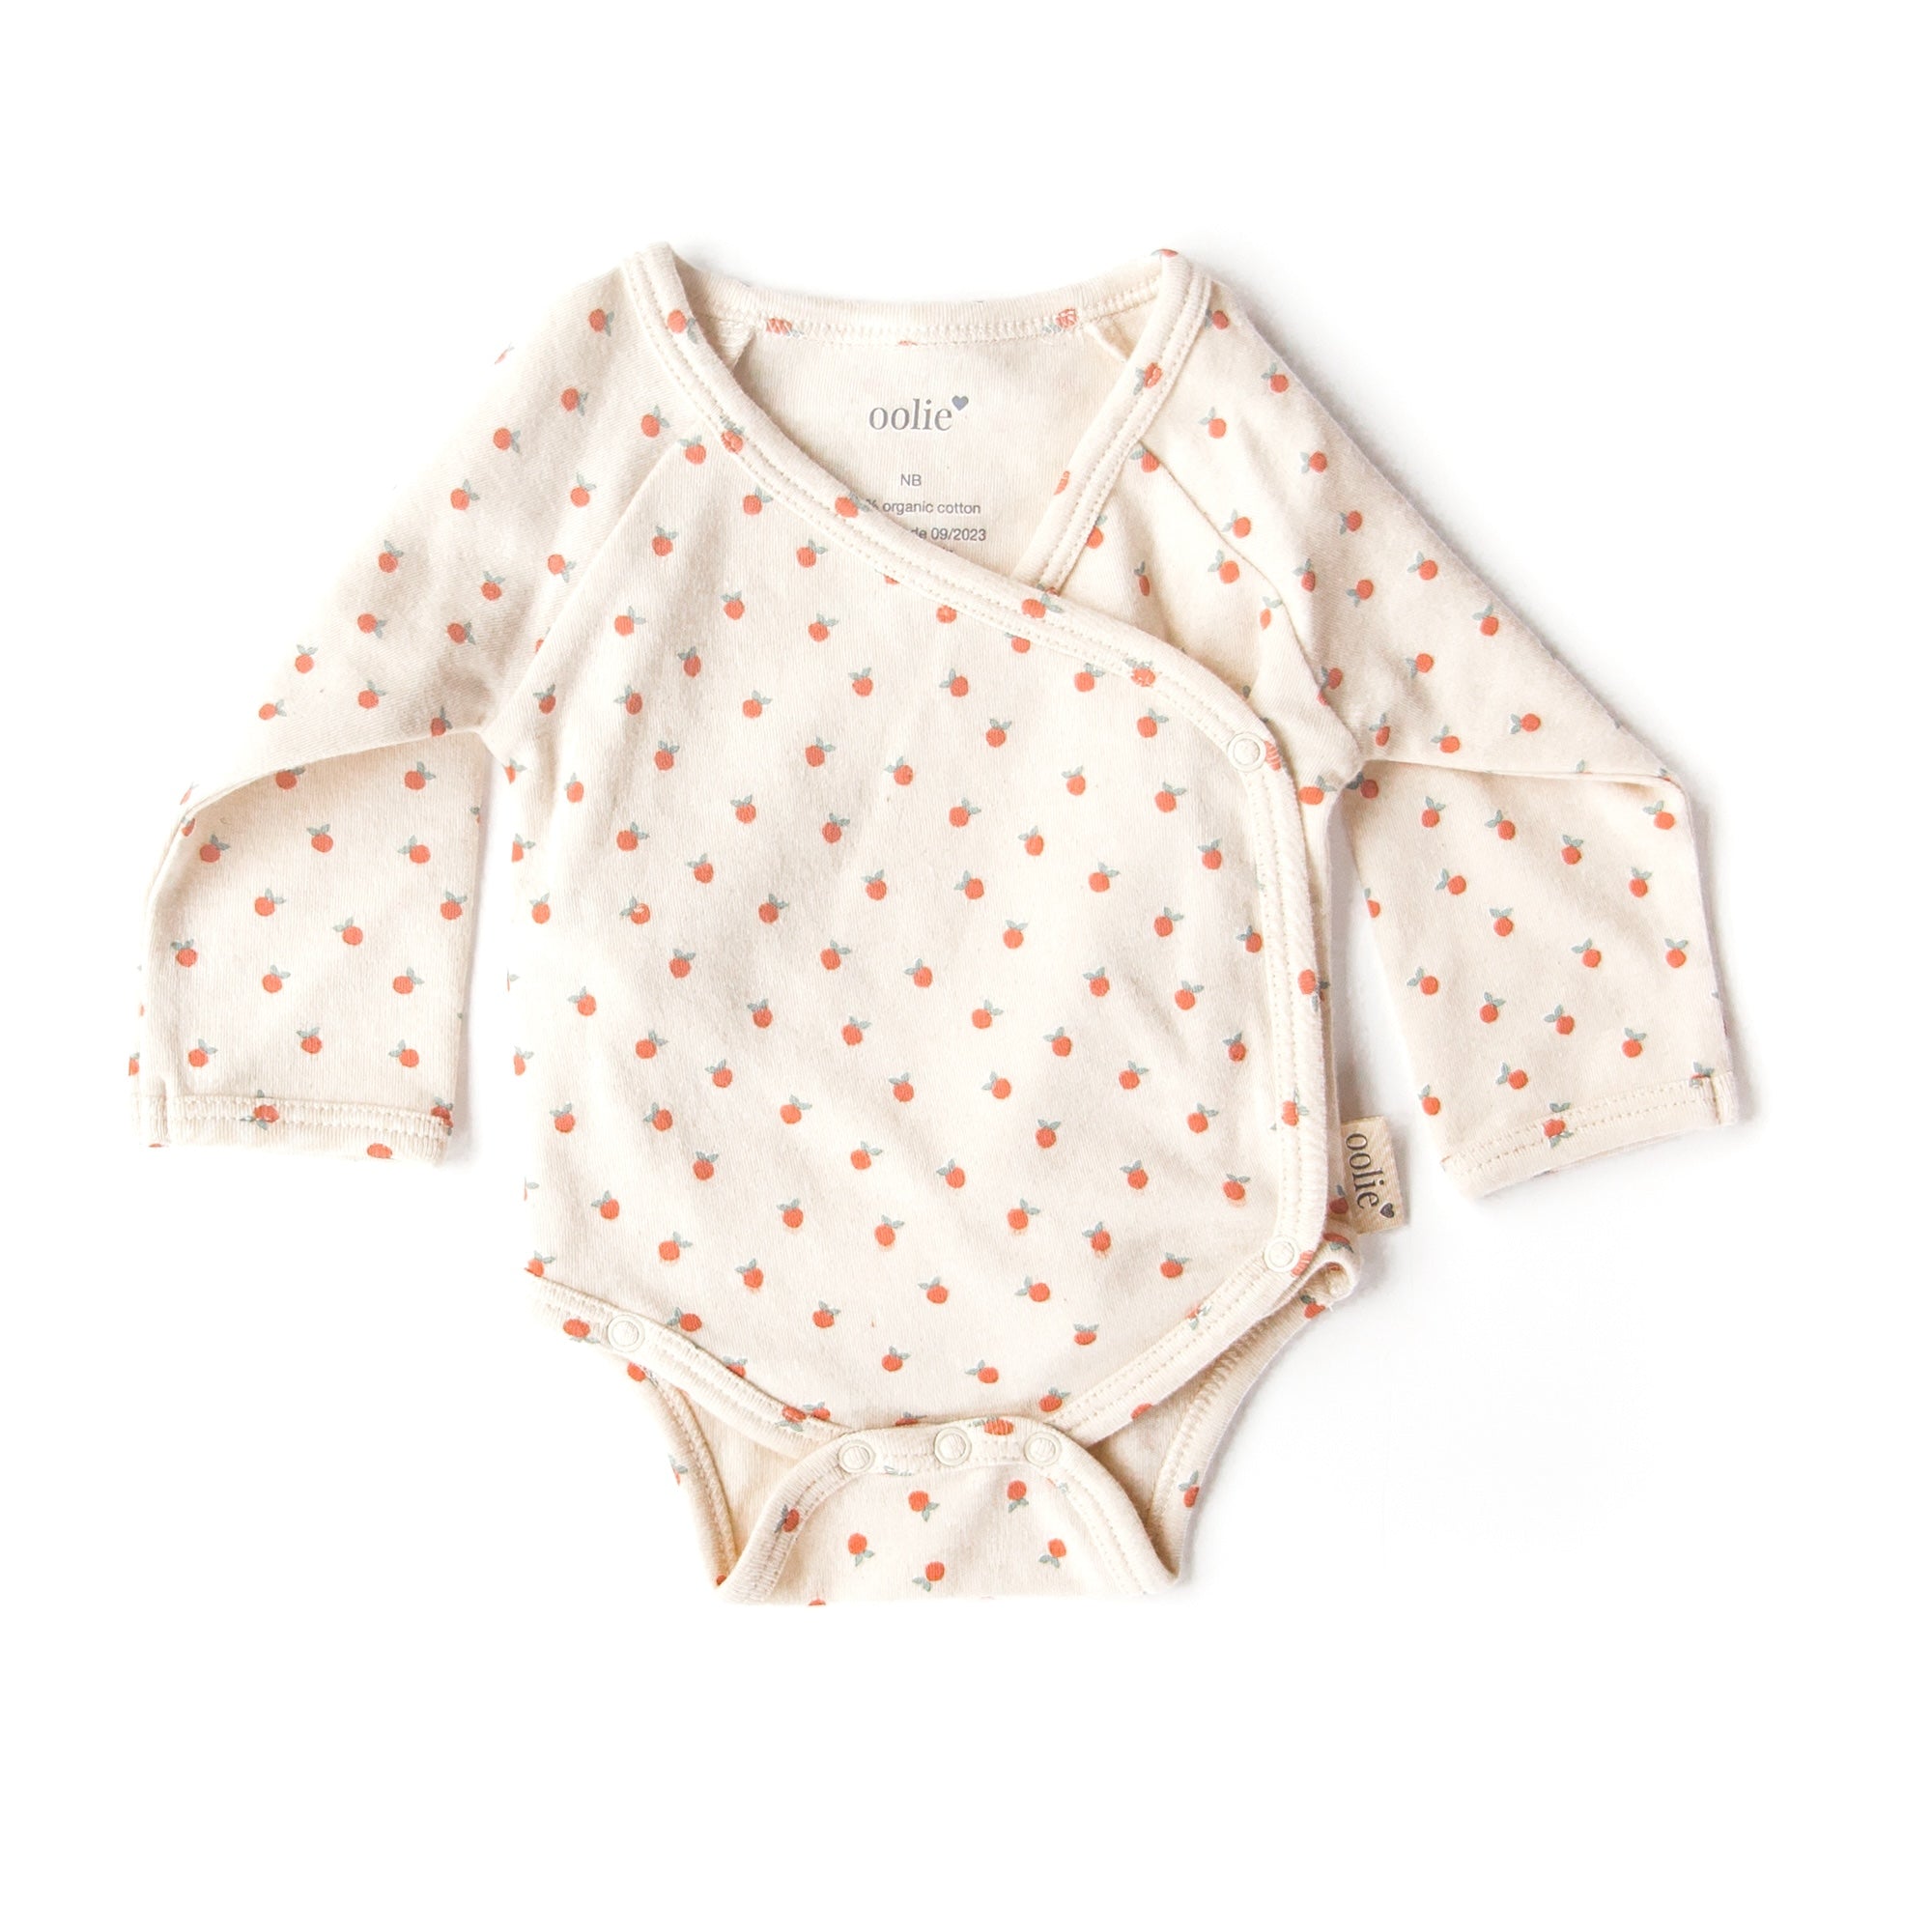 An Oolie organic cotton onesie with the little peach print, a natural color with tiny, irregular peaches in a repeating pattern.